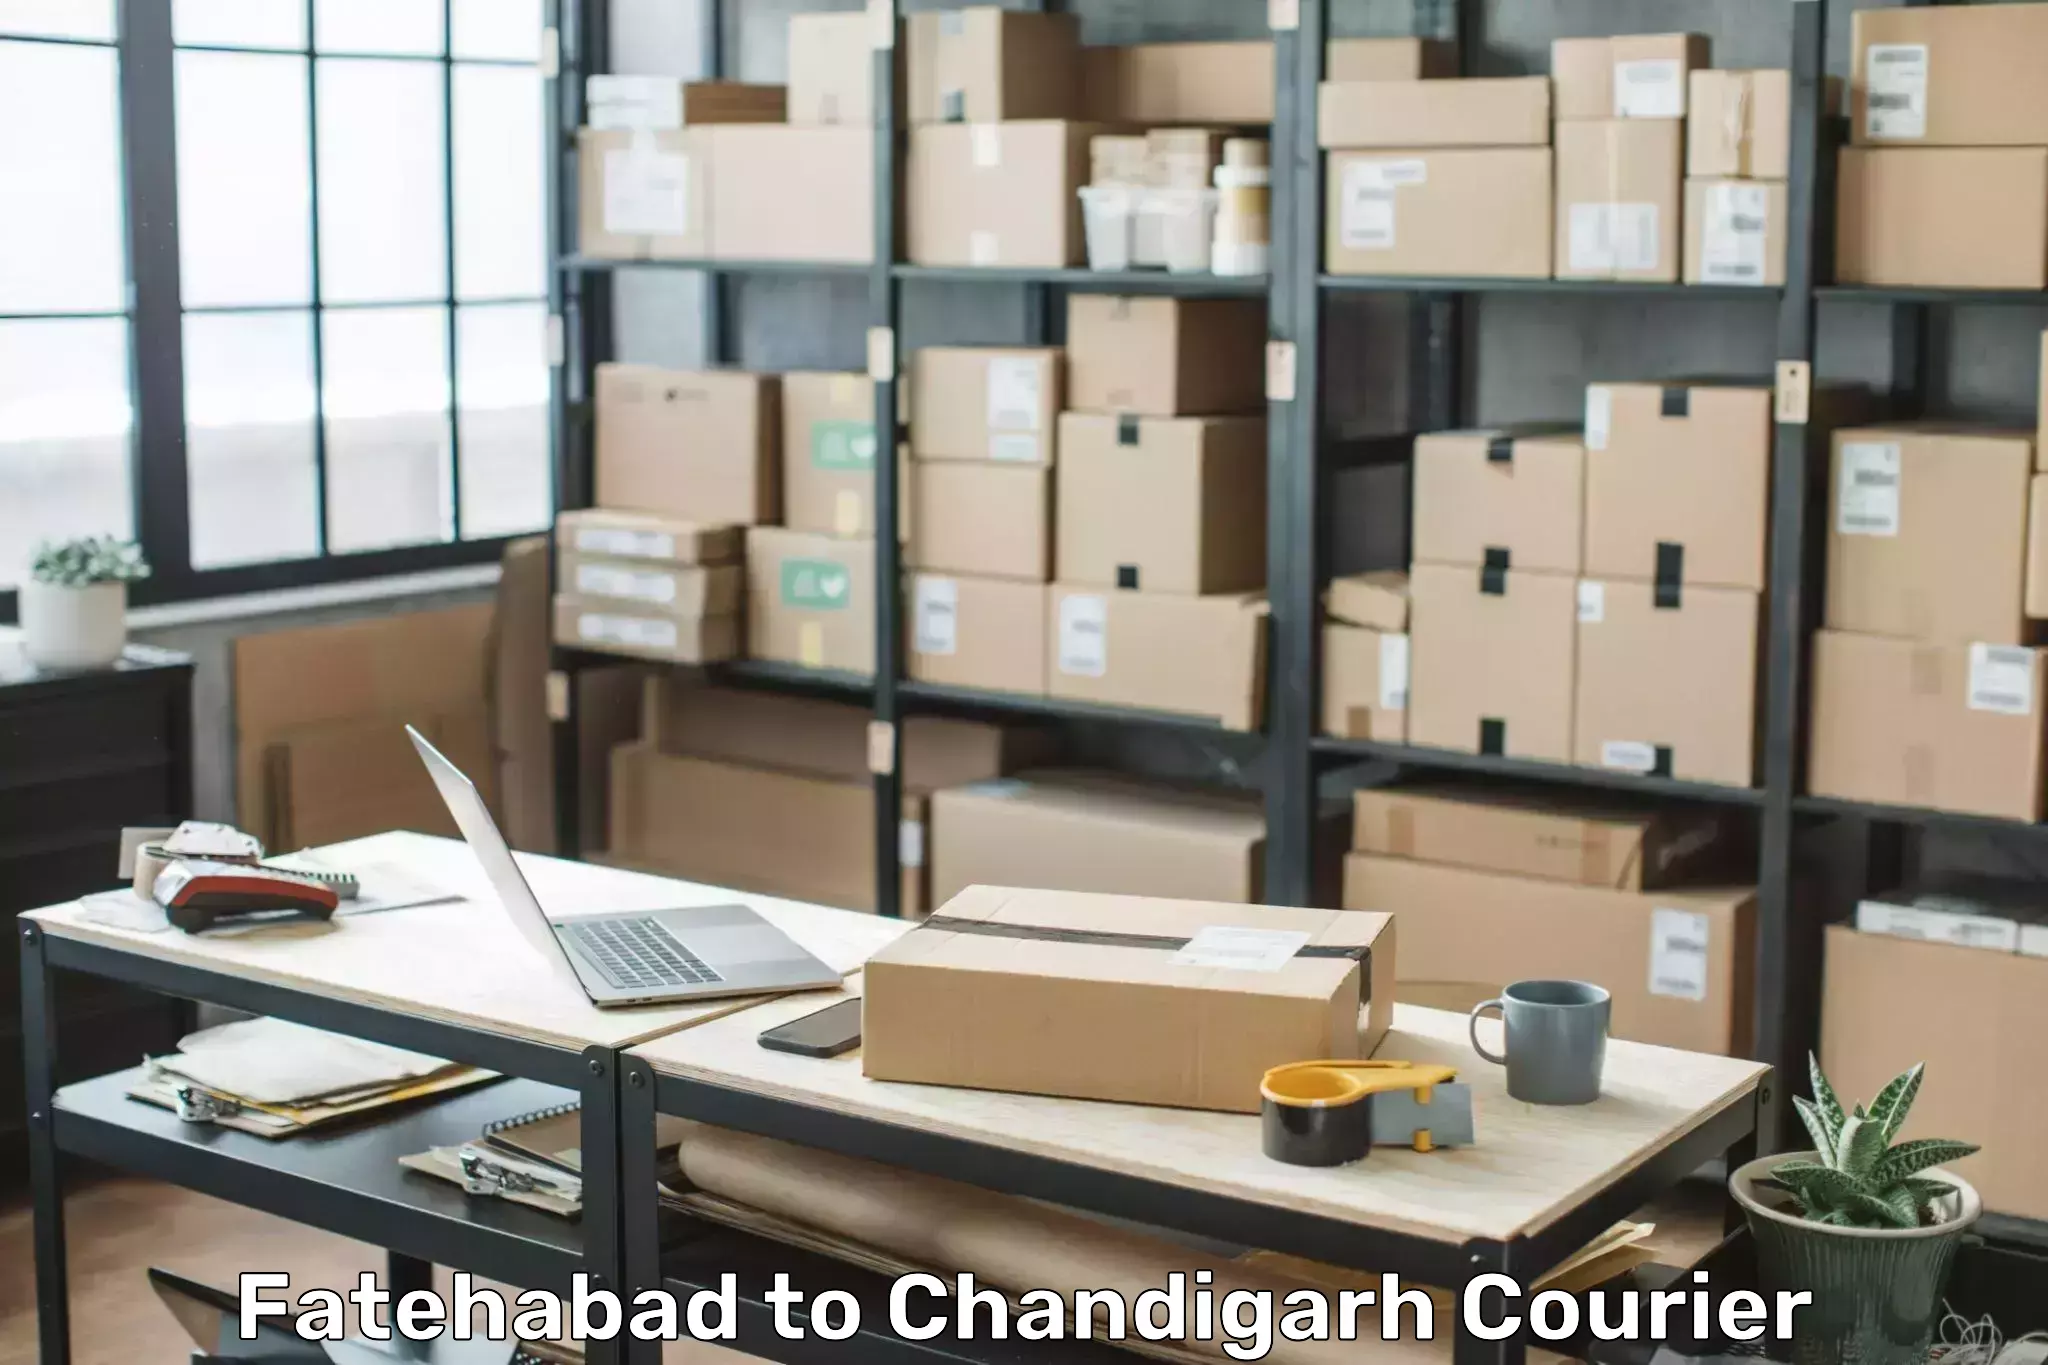 Luggage transport consultancy Fatehabad to Chandigarh